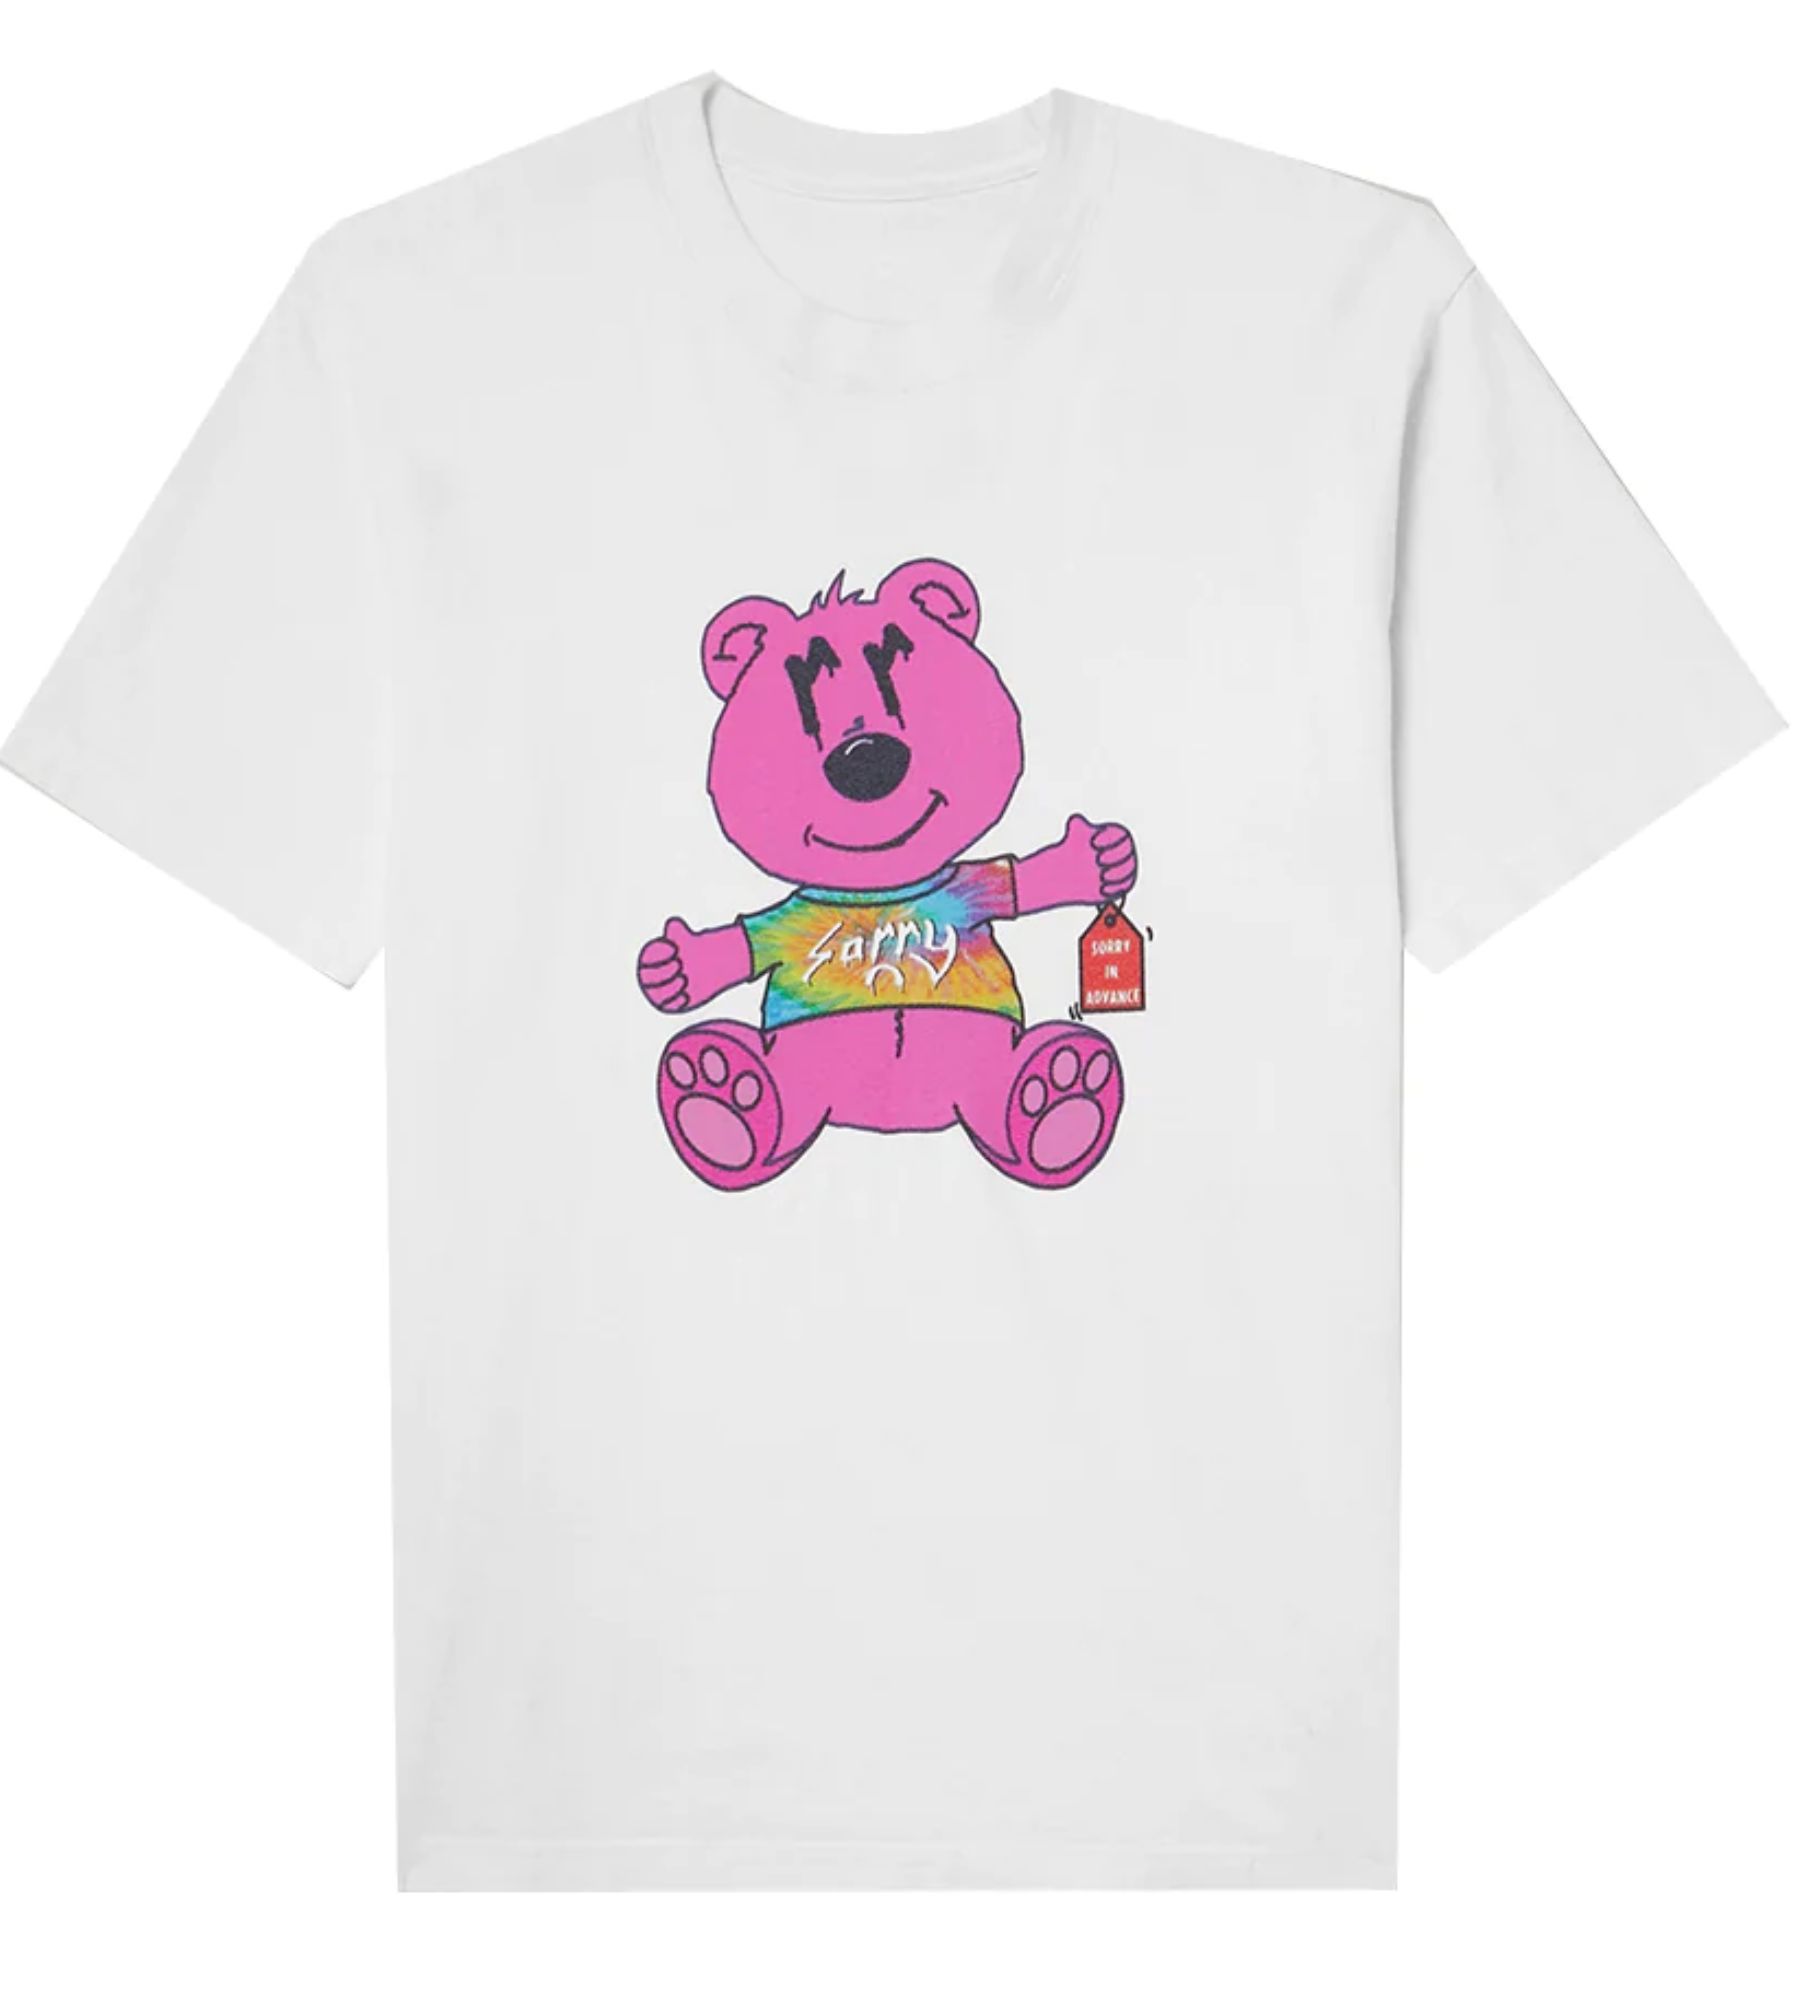 The "Sorry Pink Bear Tee" as advertised on the merchant's website.